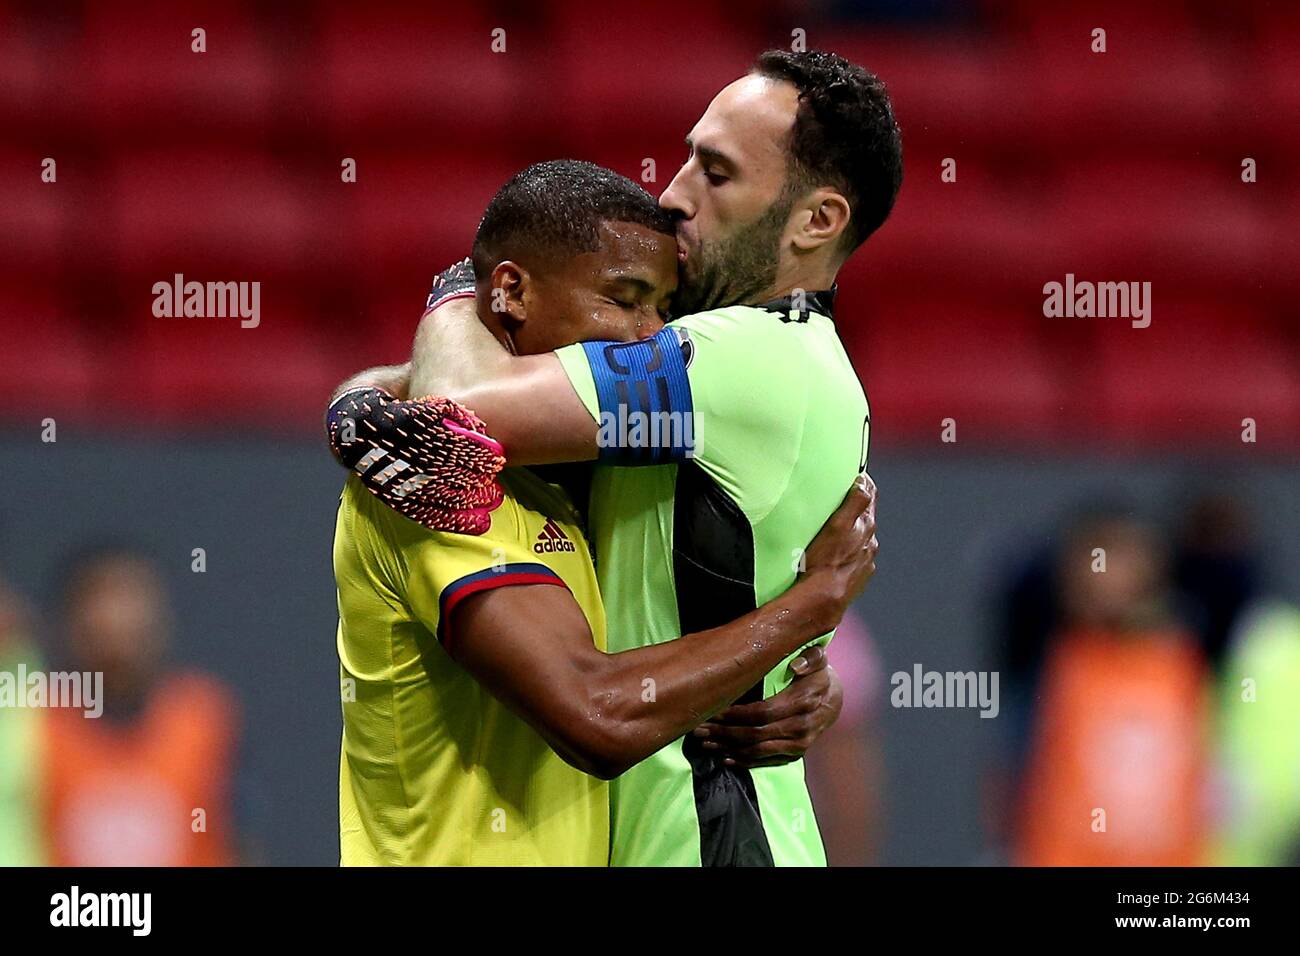 BRASILIA, BRAZIL - JULY 06: David Ospina Goalkeeper of Colombia with Wilmar Barrios during a penalty shootout ,after a the Semifinal match between Argentina and Colombia as part of Conmebol Copa America Brazil 2021 at Mane Garrincha Stadium on July 6, 2021 in Brasilia, Brazil. (MB Media) Stock Photo